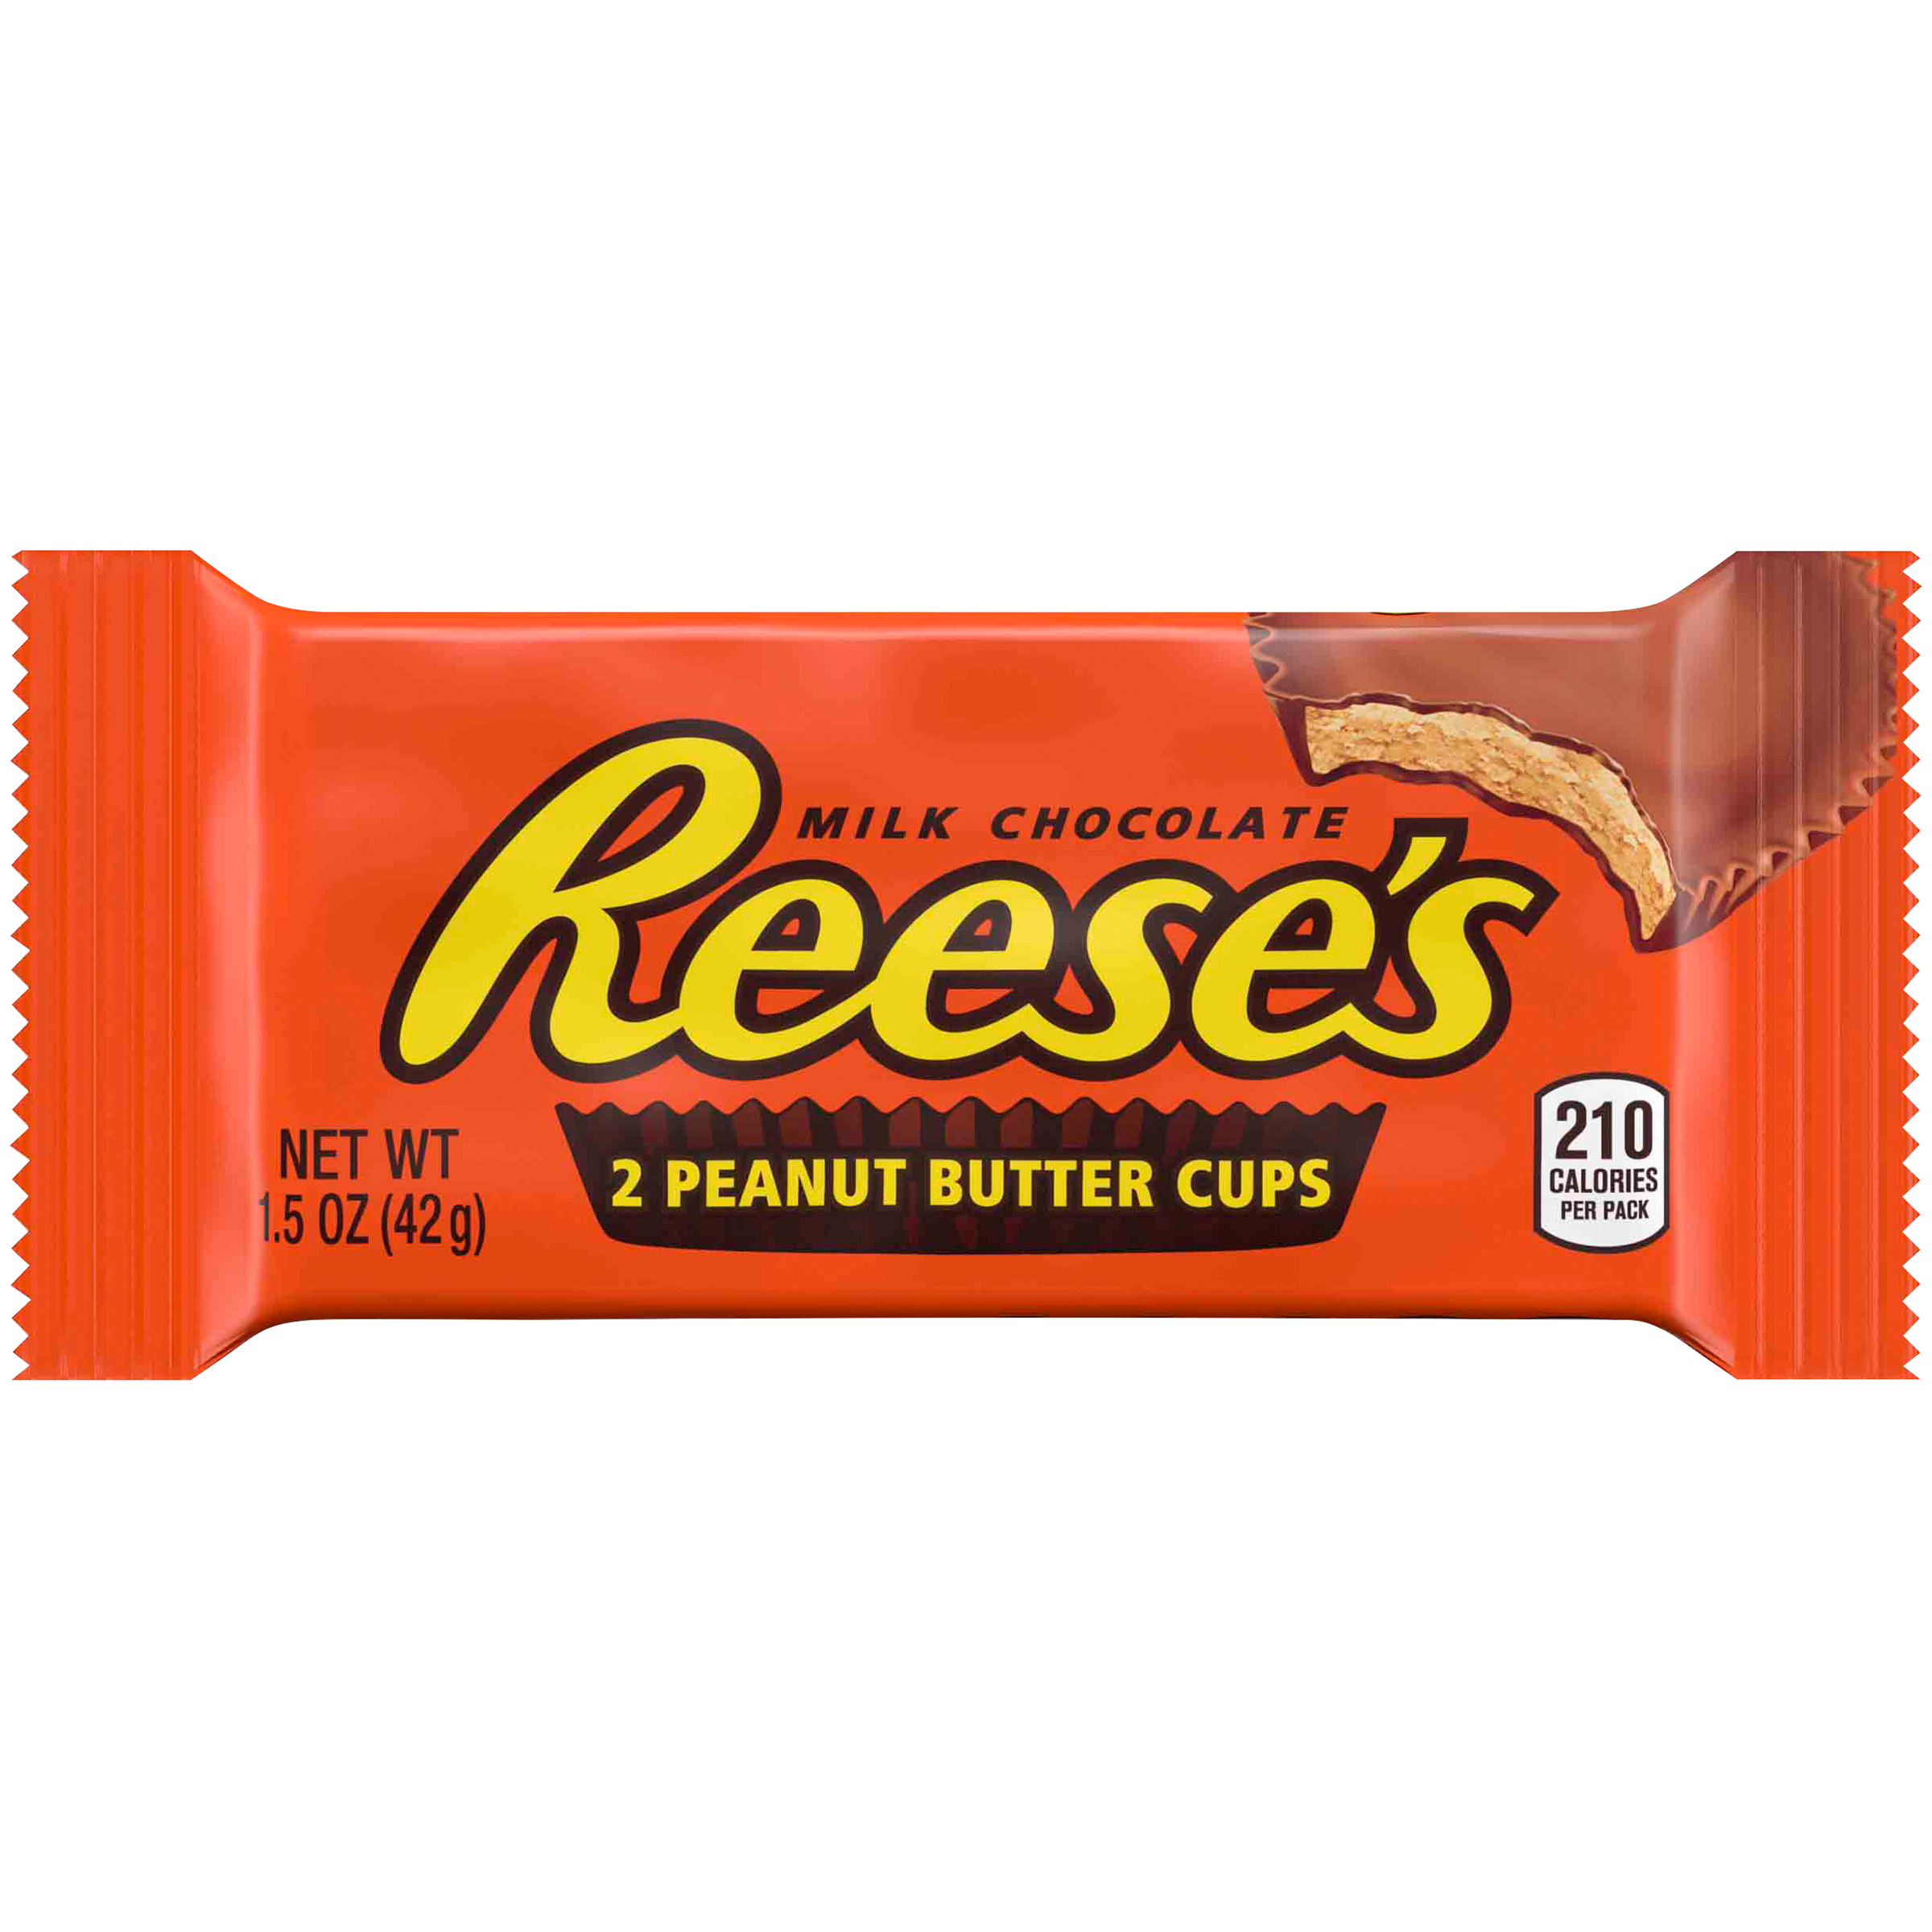 Reese's Milk Chocolate Peanut Butter Cups, 2 cups [1.5 oz (42 g)]